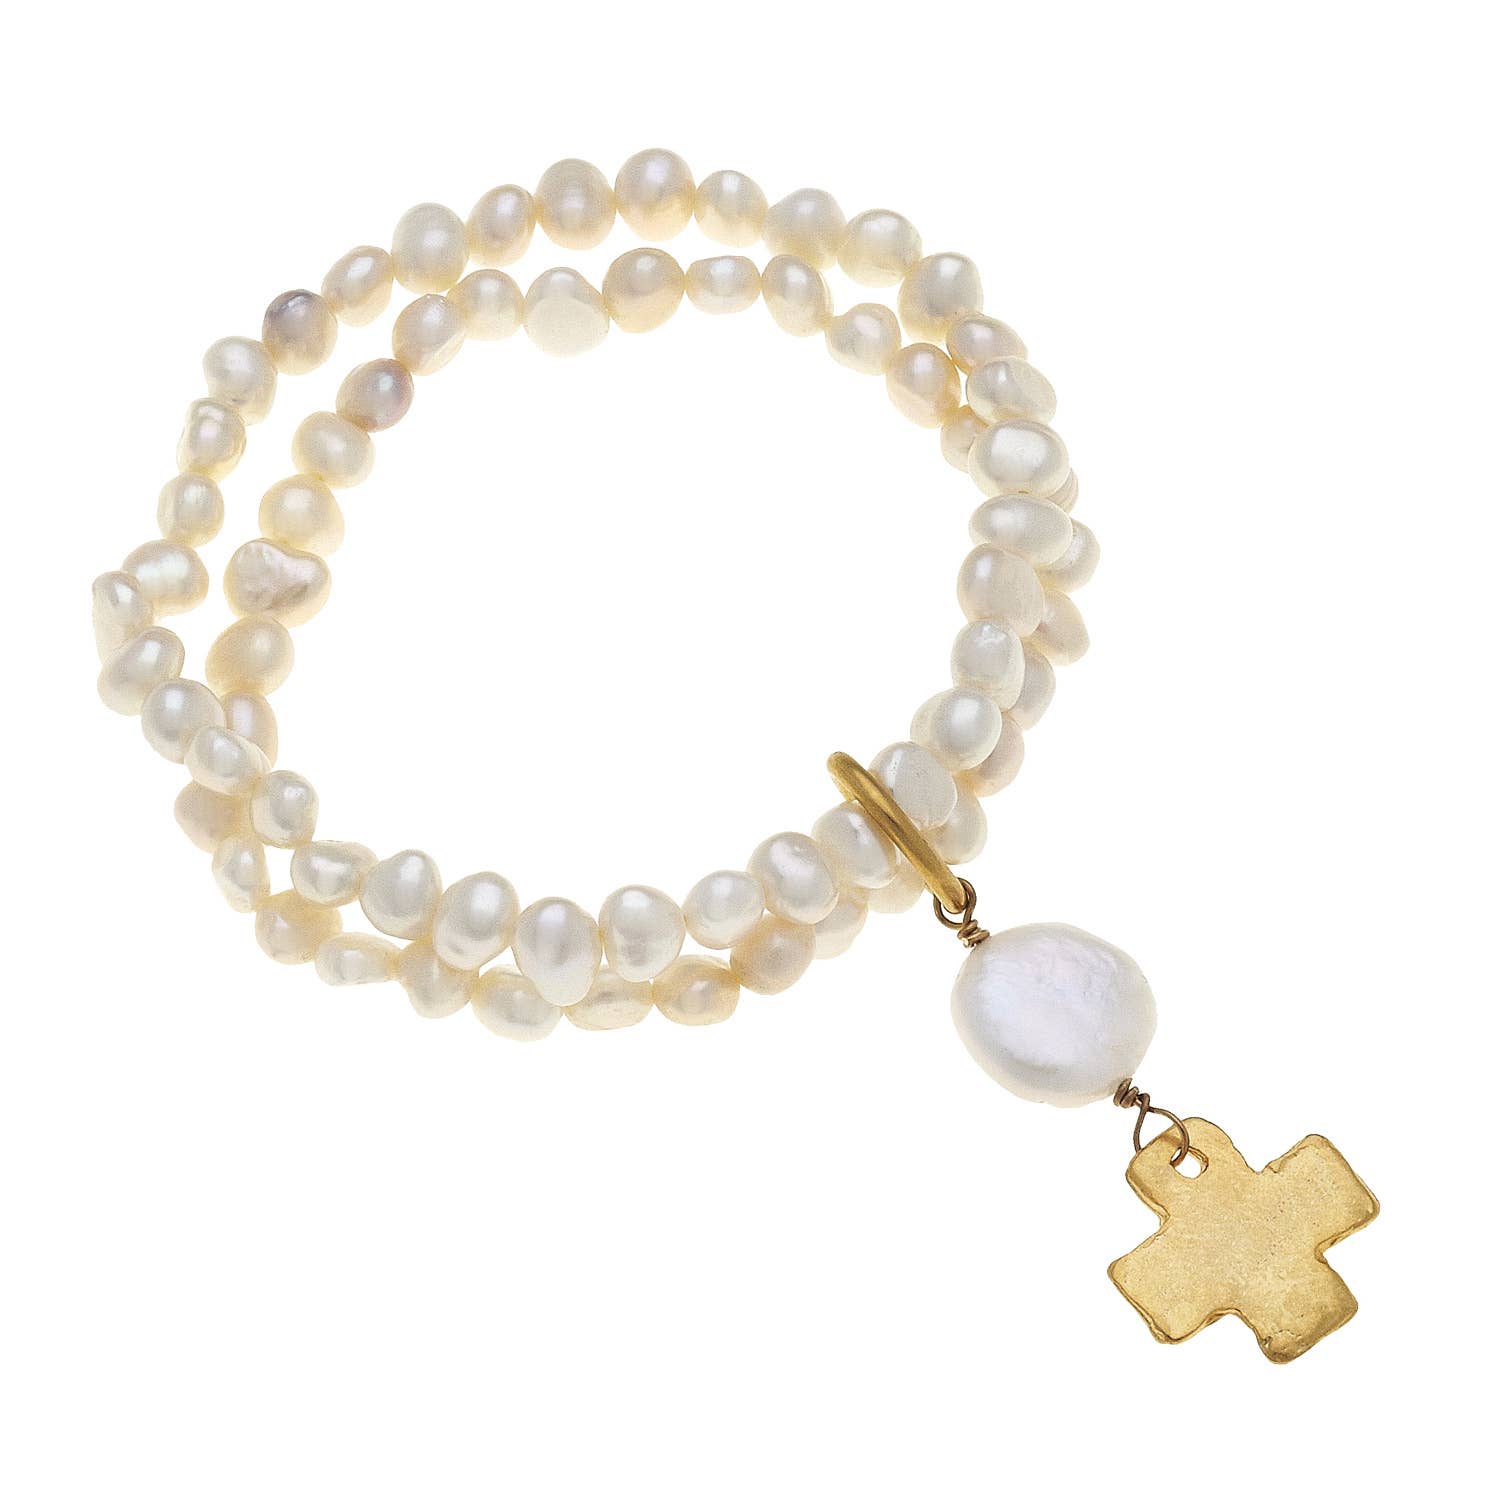 Susan Shaw - Gold Cross on Double Freshwater Pearl Stretch Bracelet